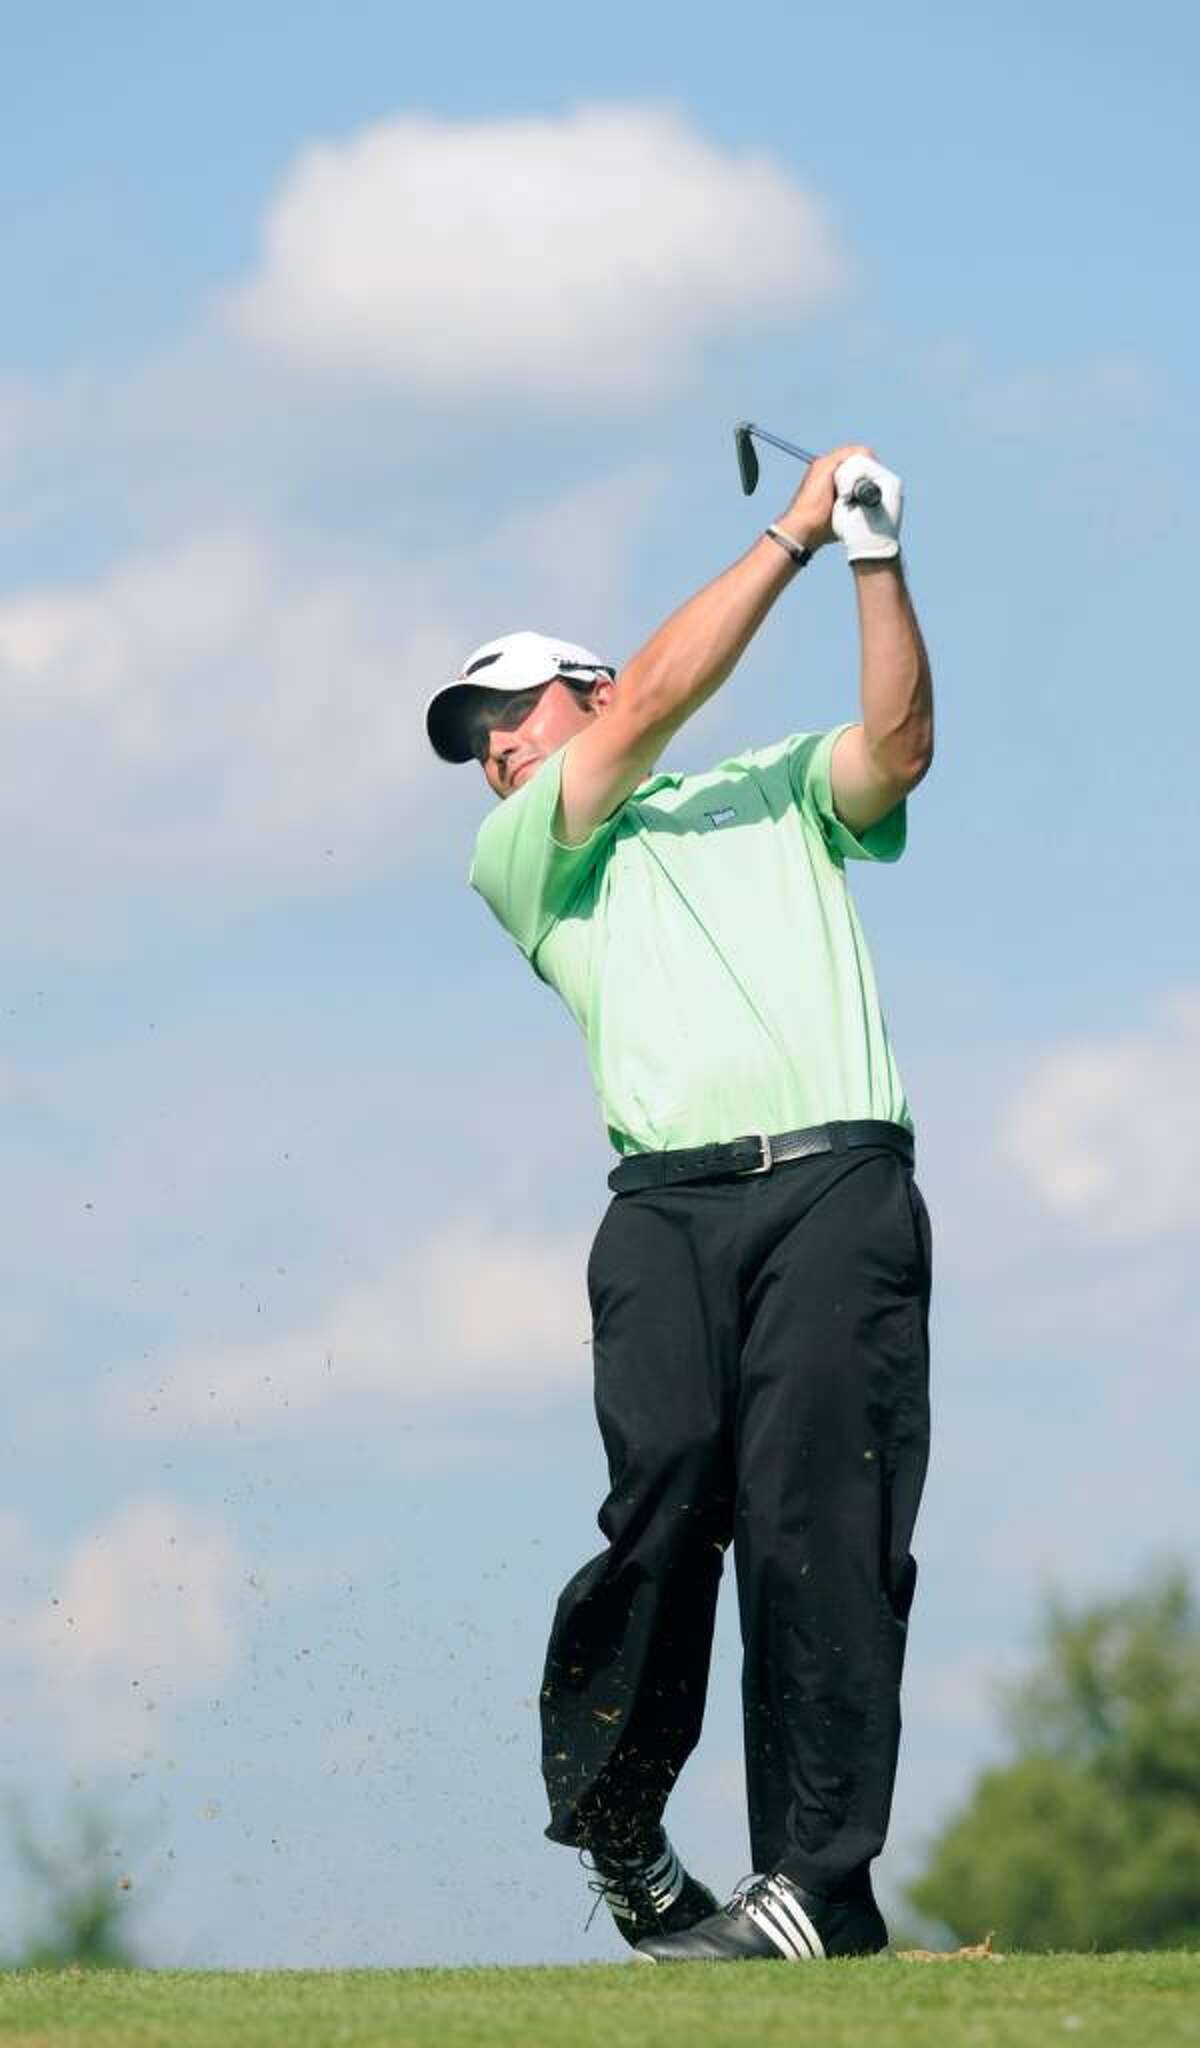 Golfer Patrick Massi in action at the Griffith E. Harris Golf Course, Greenwich, Tuesday, July 20, 2010.